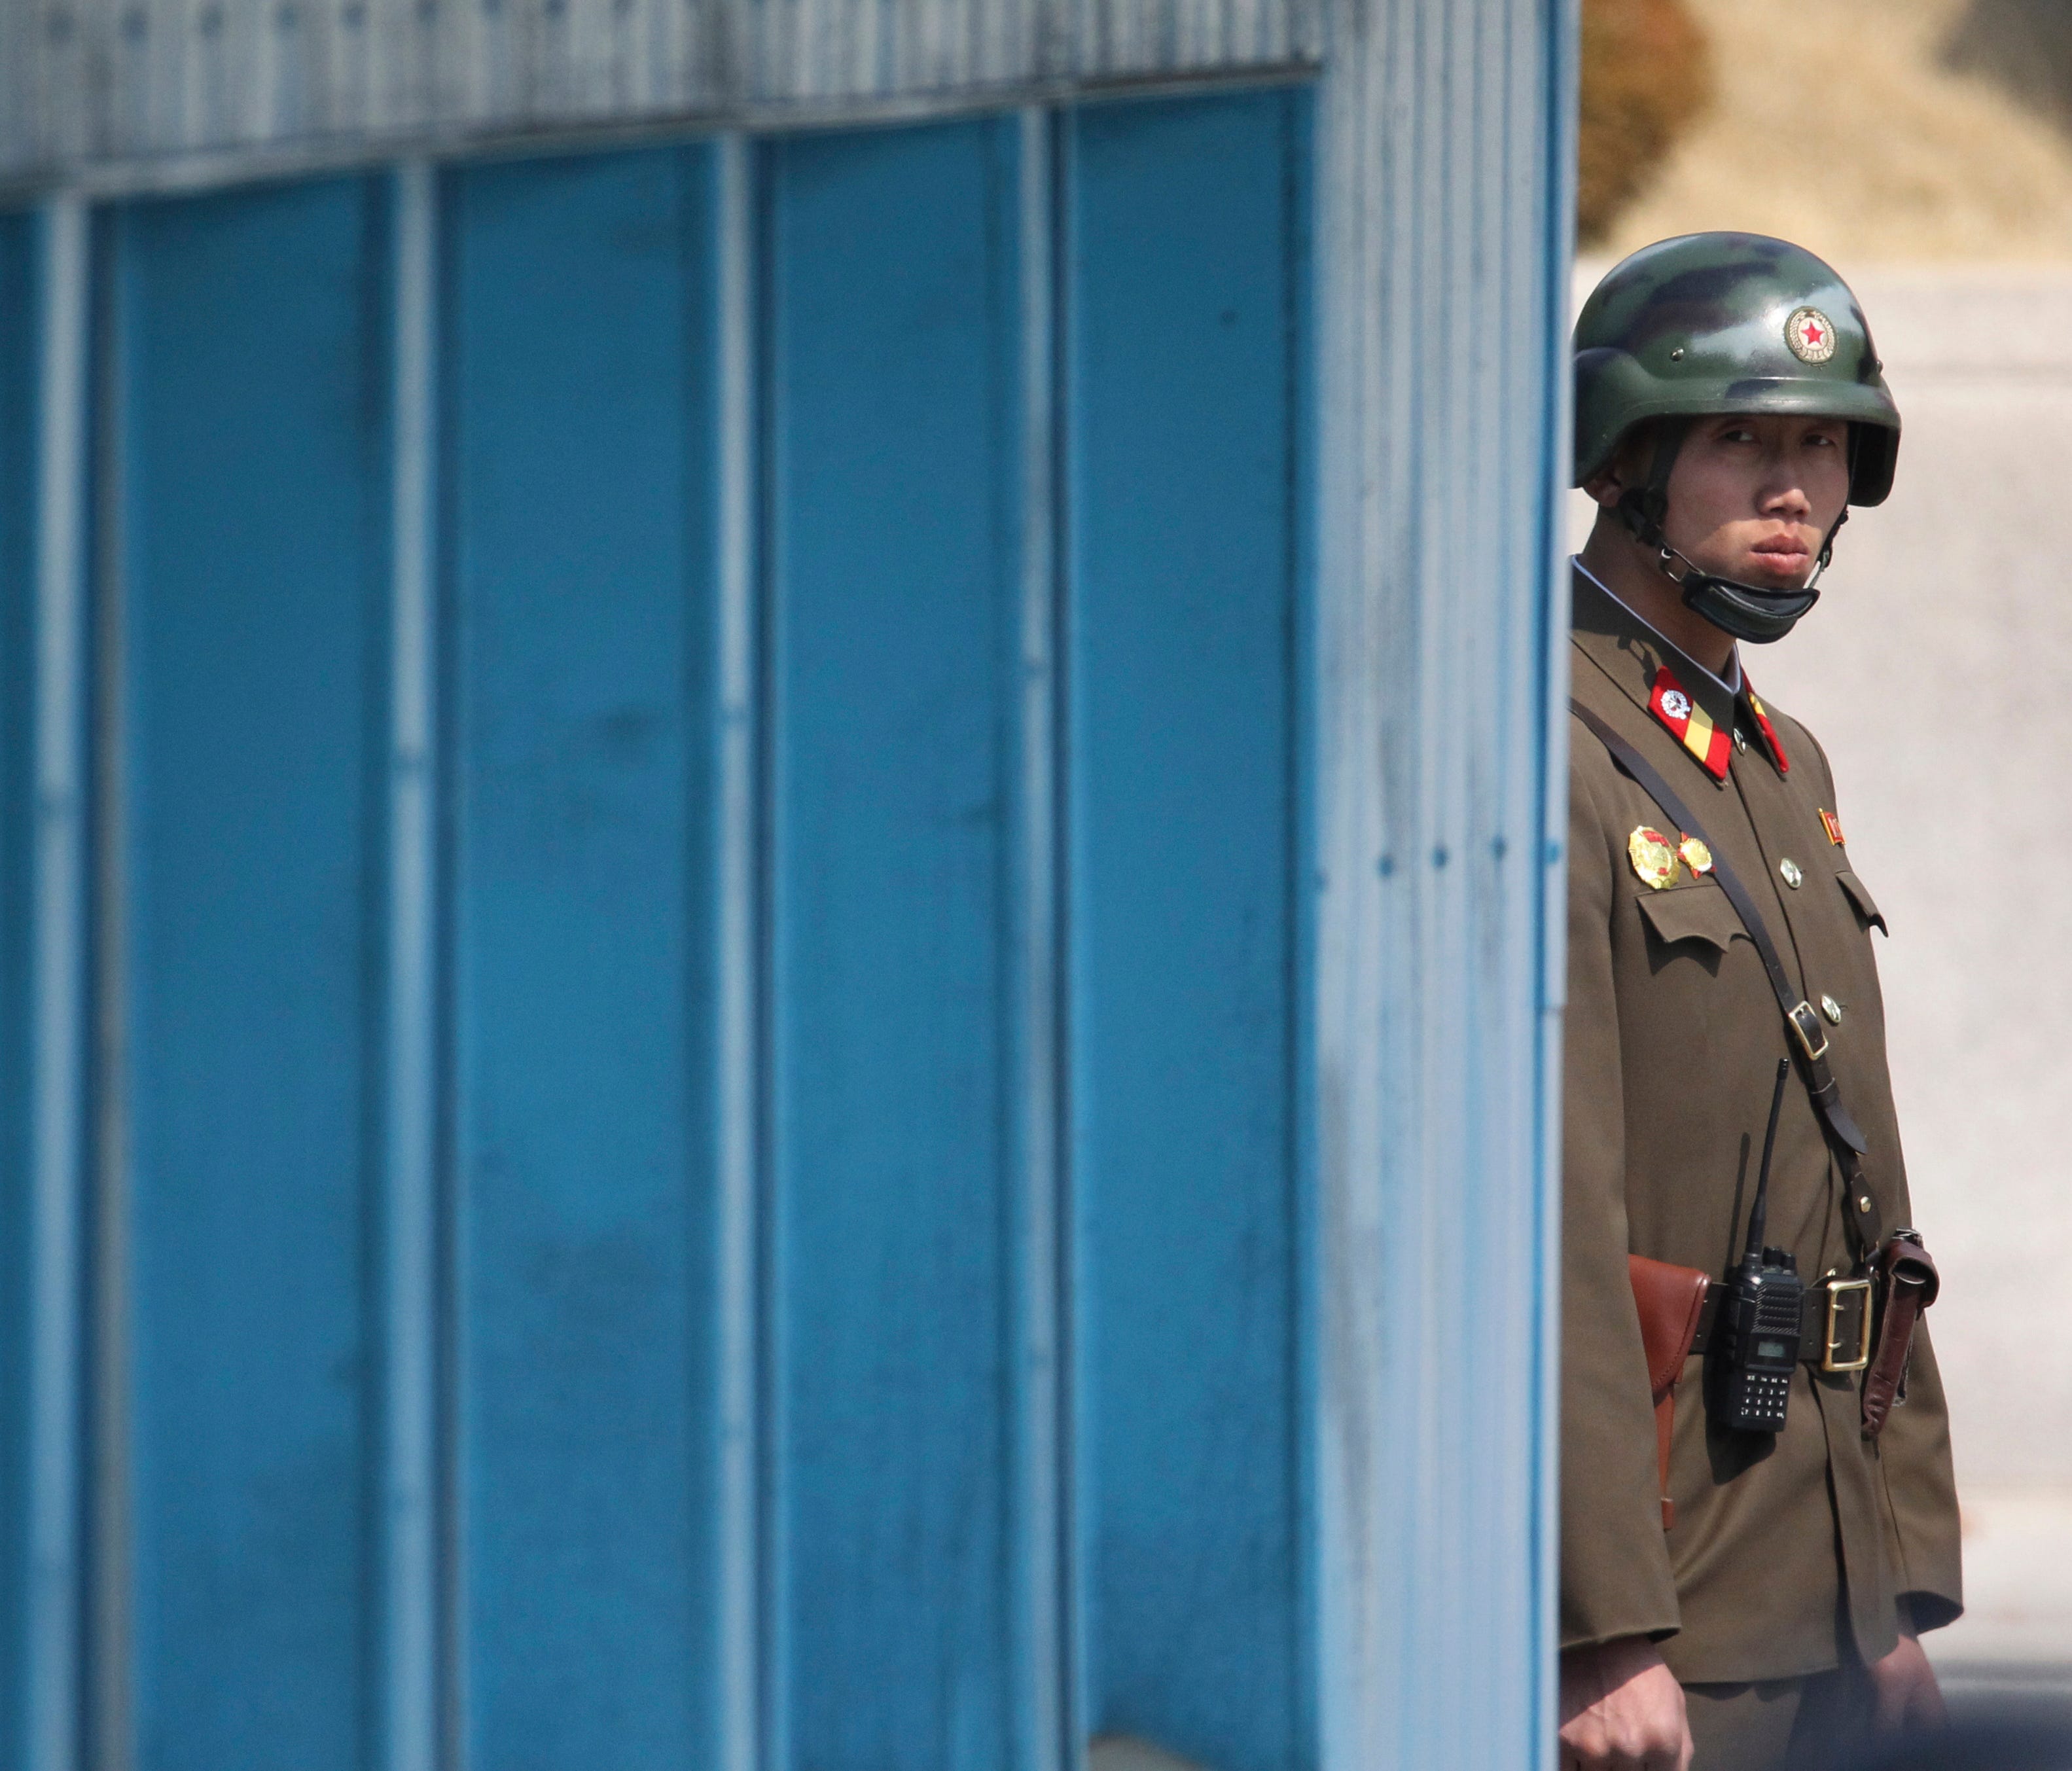 A North Korean soldier looks at the south side while Secretary of State Rex Tillerson is visiting the border village of Panmunjom, which has separated the two Koreas since the Korean War, South Korea, Friday, March 17, 2017.